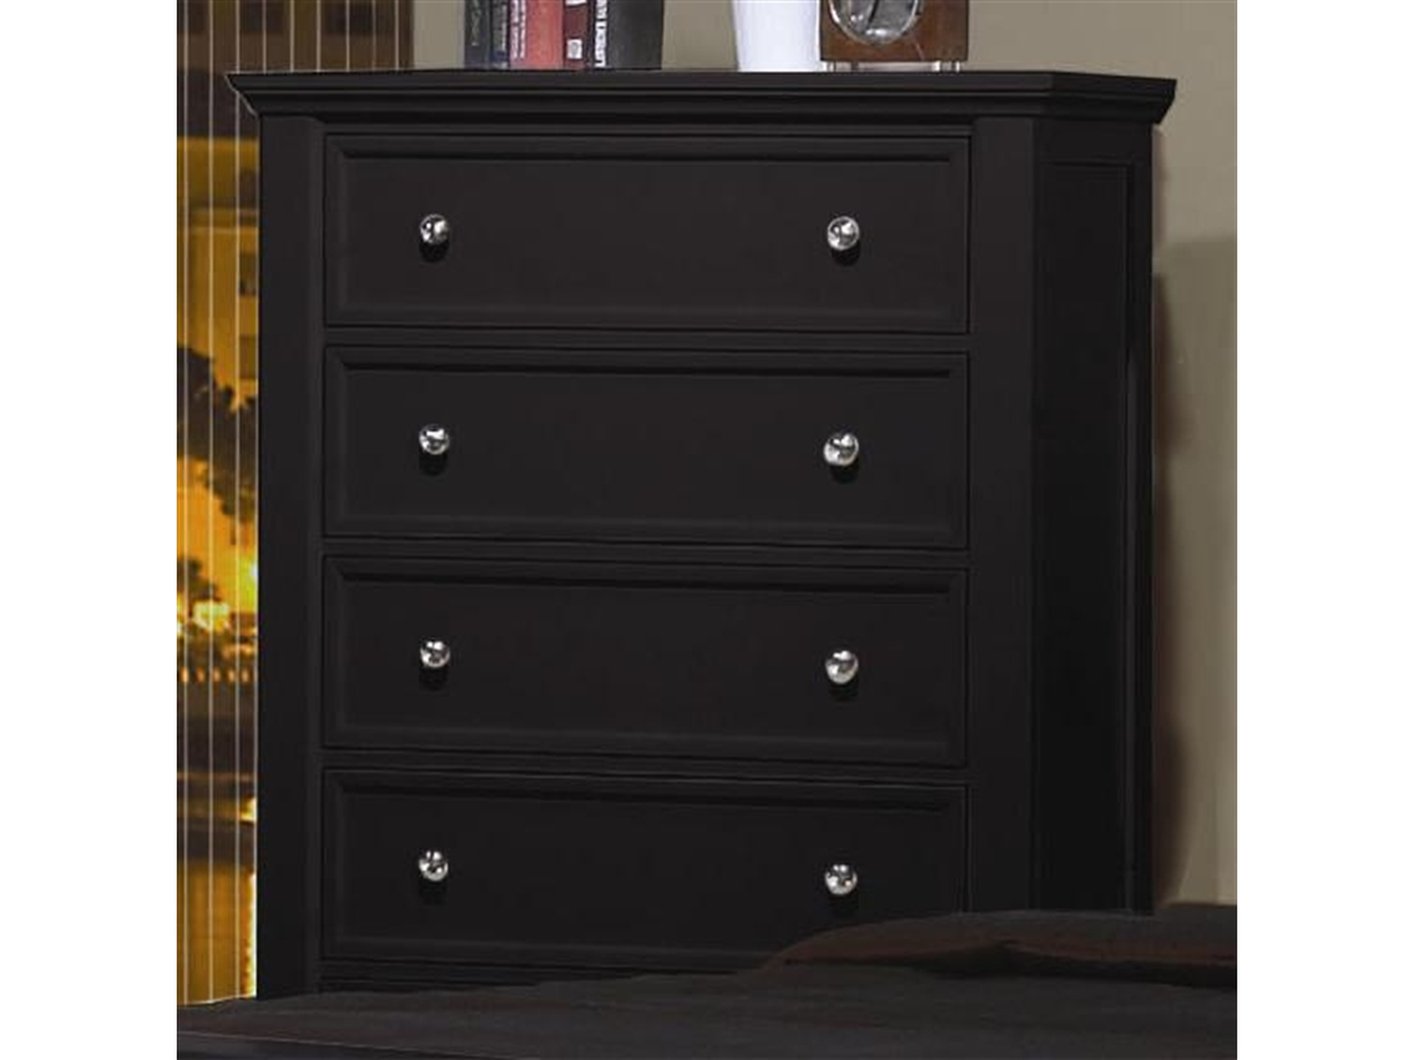 Chest of drawers black wooden chest of drawers KJSNHHG